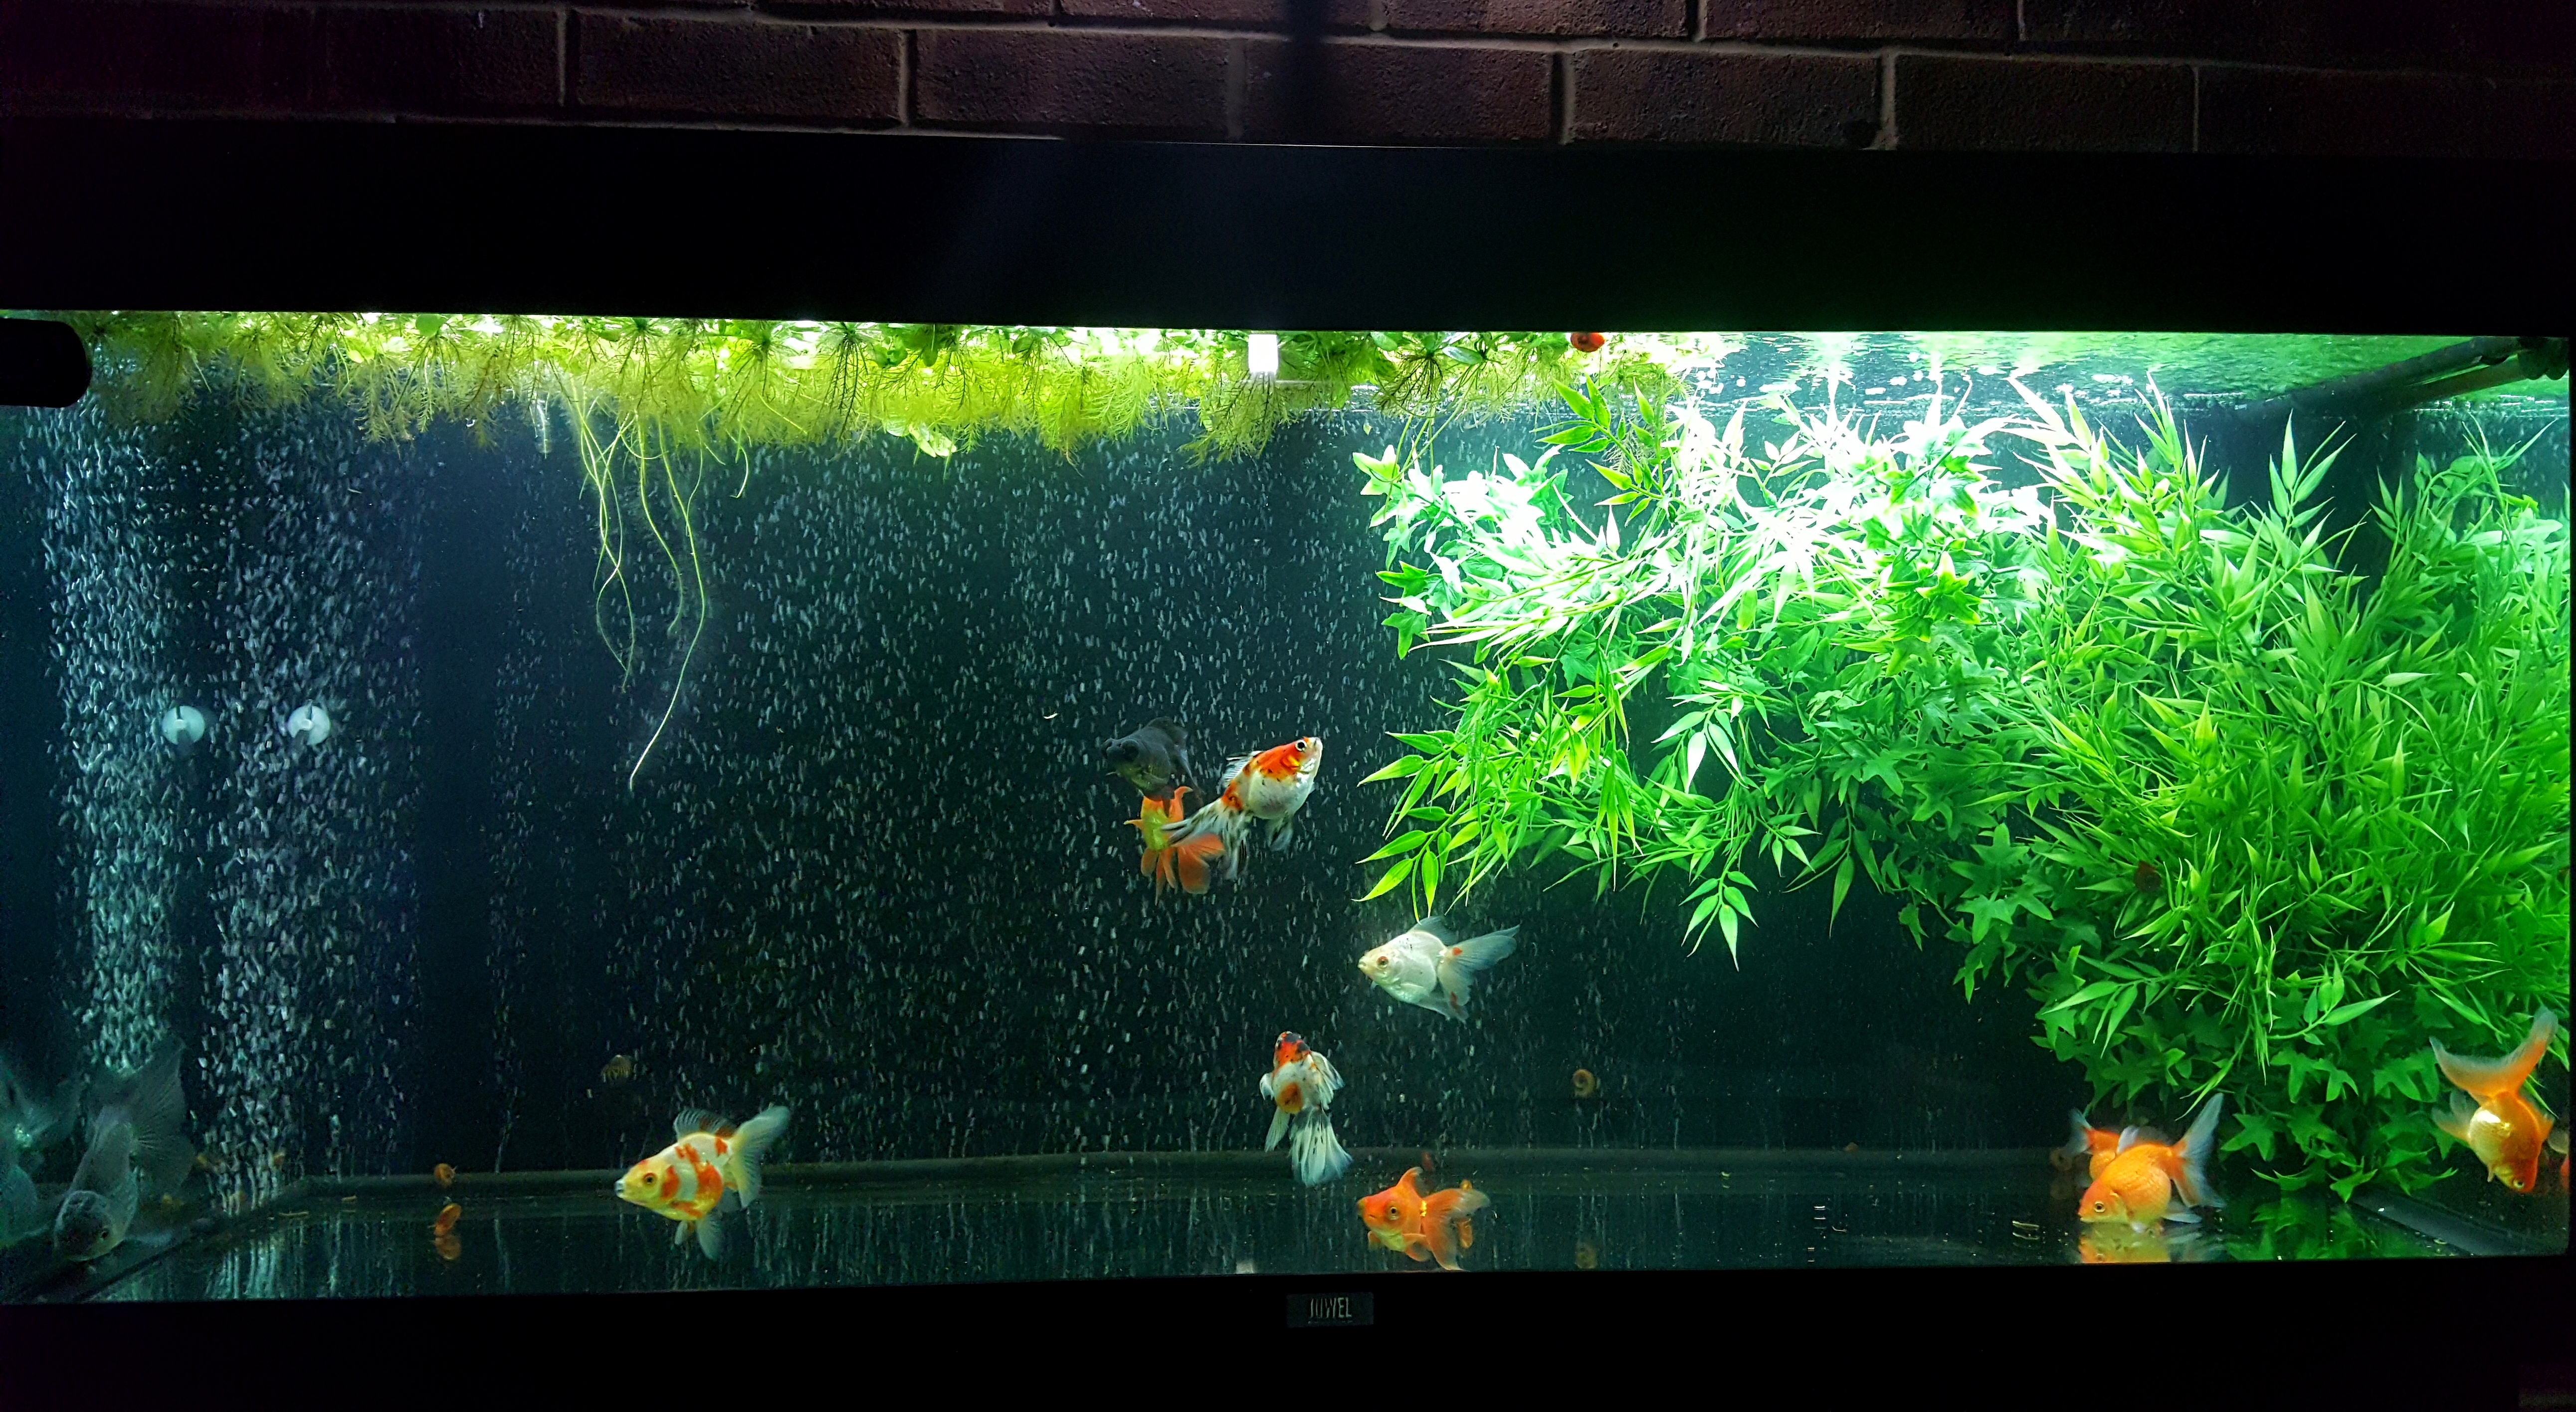 AUTO-CLEANING GOLDFISH TANK? Experiment in progress